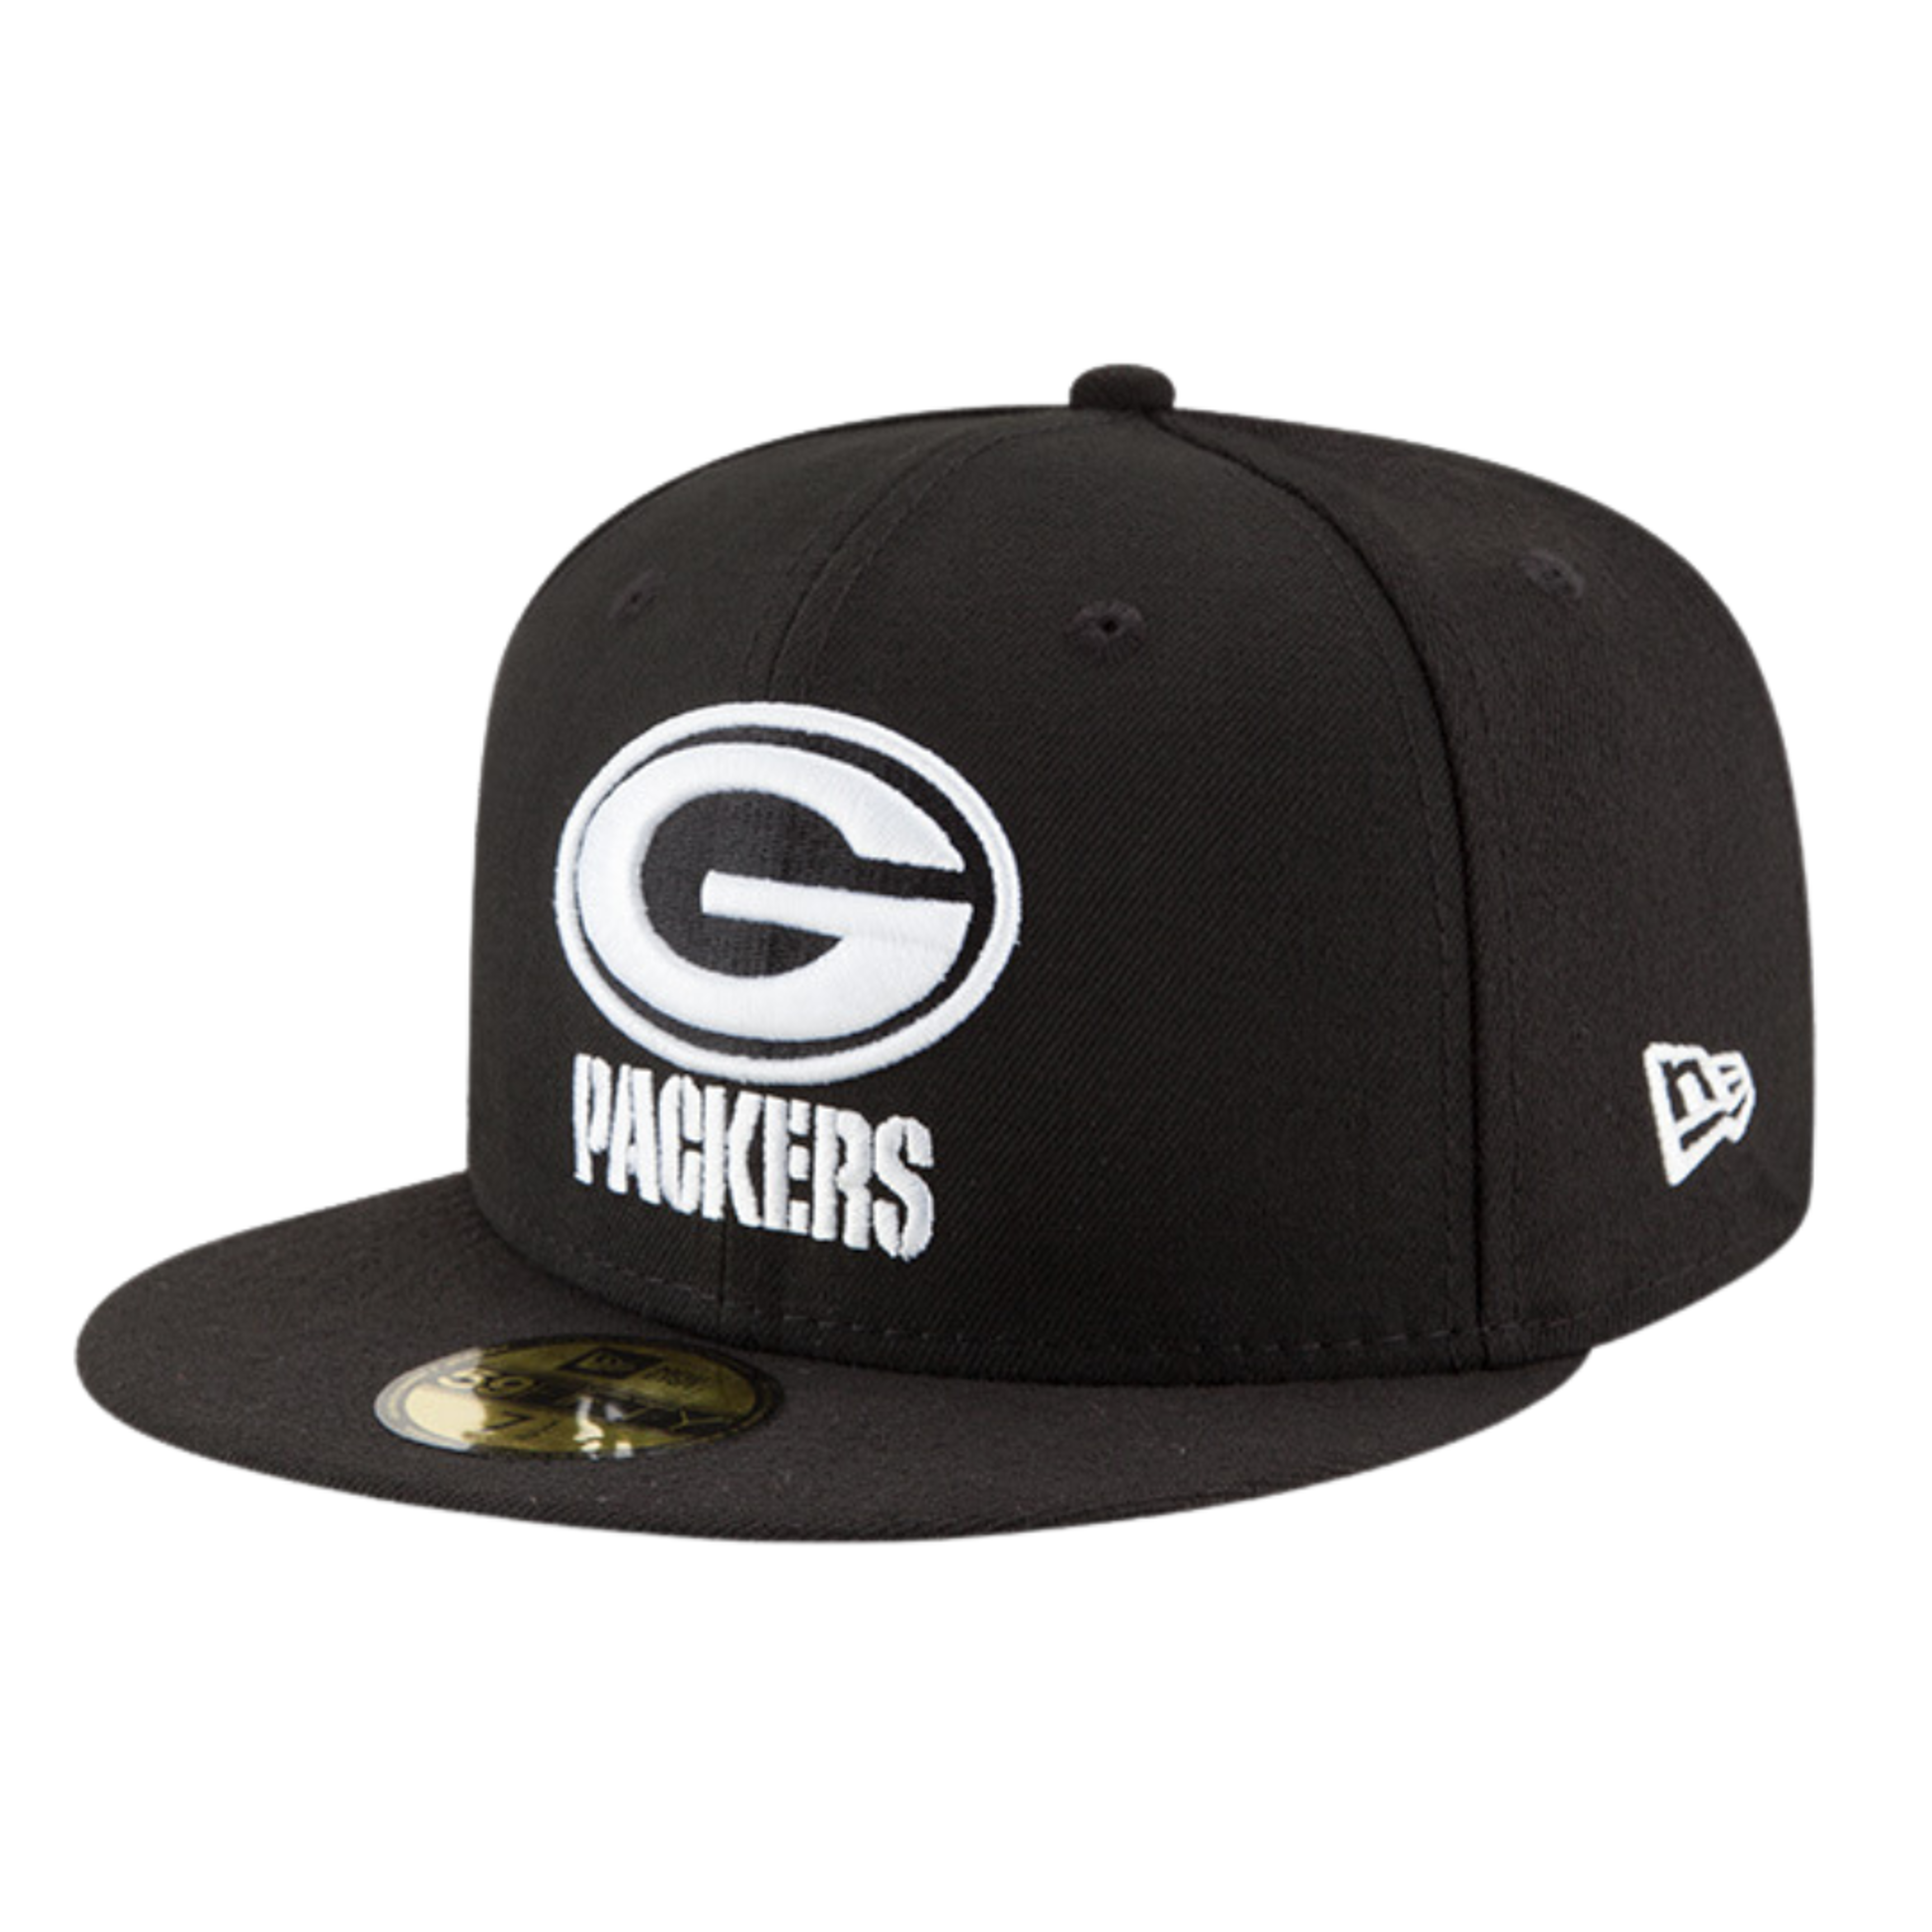 Alternate View 1 of Green Bay Packers Black on Dub New Era Black/White 59FIFTY Fitte